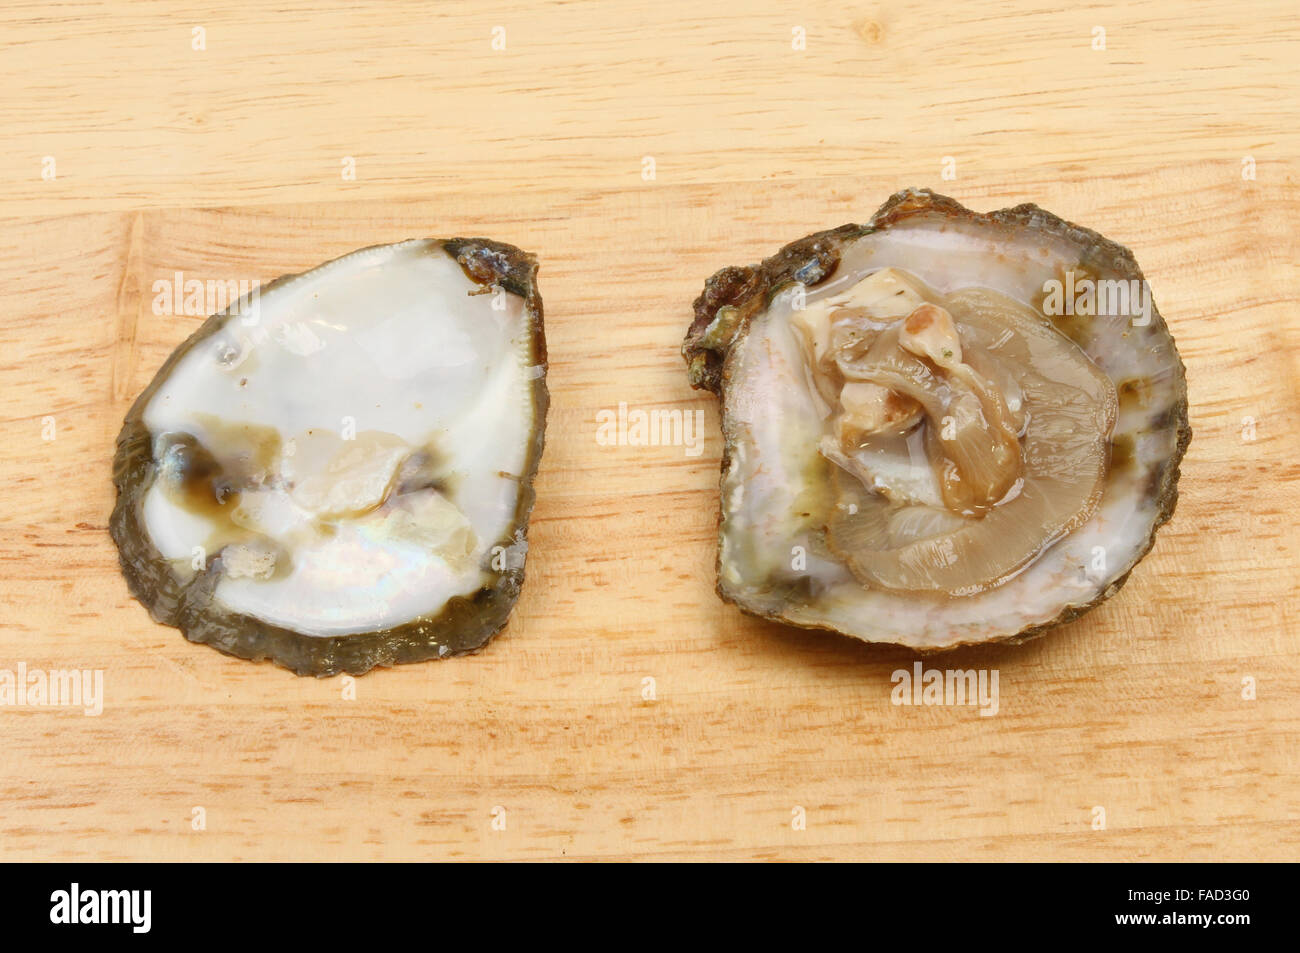 Opened fresh oyster on a wooden board Stock Photo